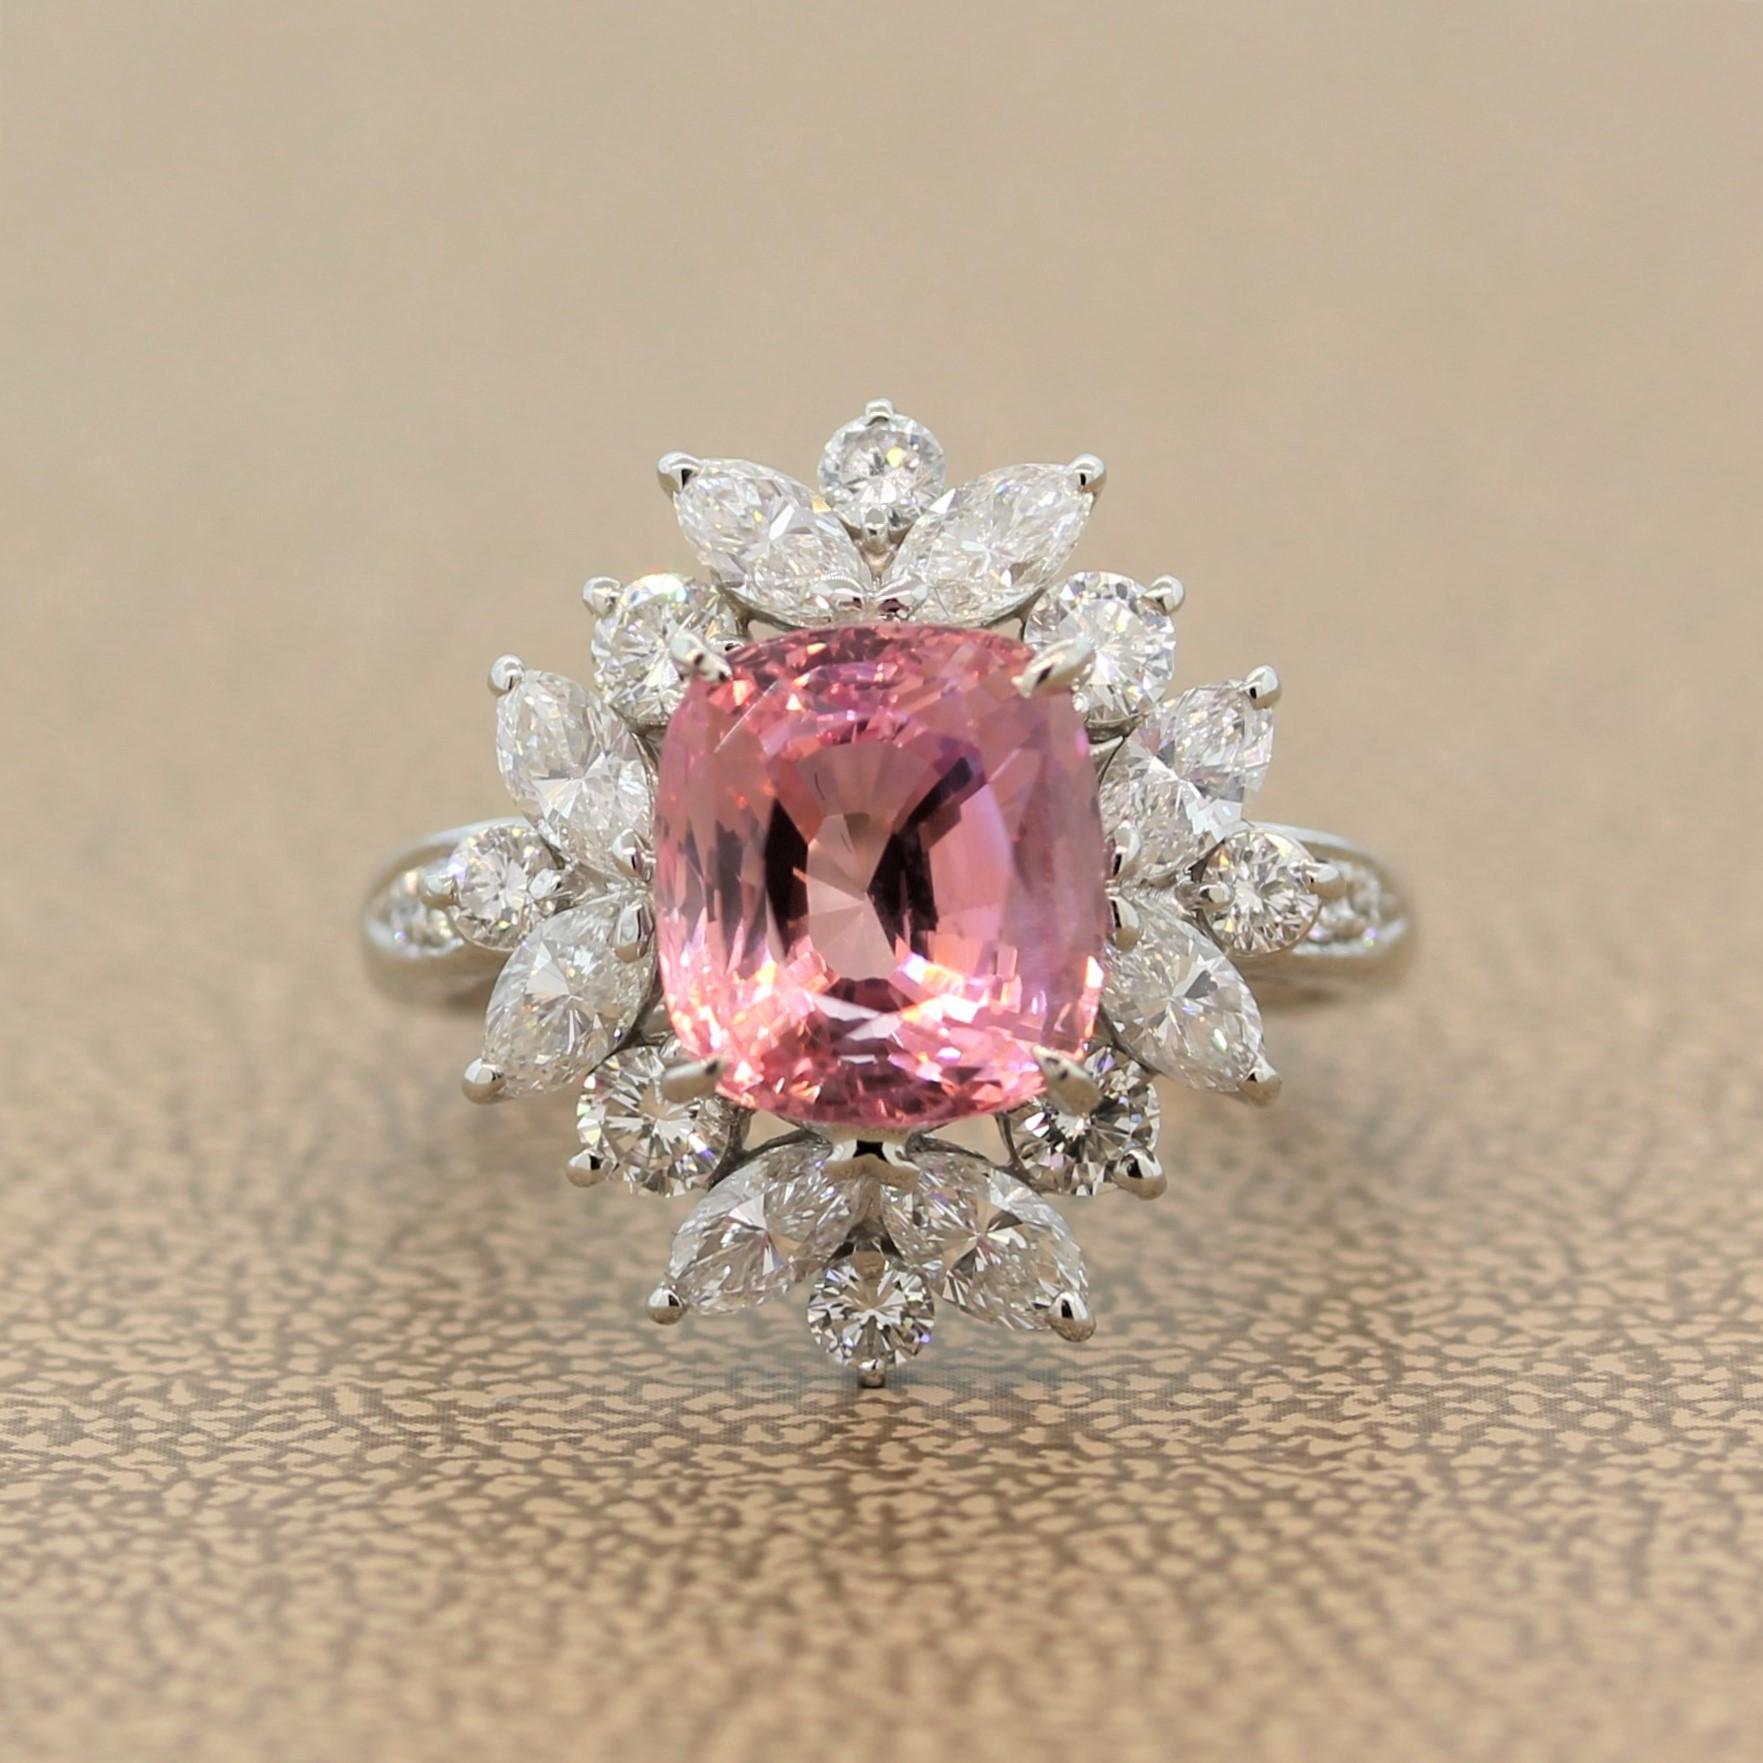 A stunning ring featuring a rare GIA certified 4.74 carat natural Padparascha sapphire. The pinkish orangy gem is from the original and most important source of Padparadscha sapphires, Sri Lanka. The gemstones is enclosed by a haloing cluster of